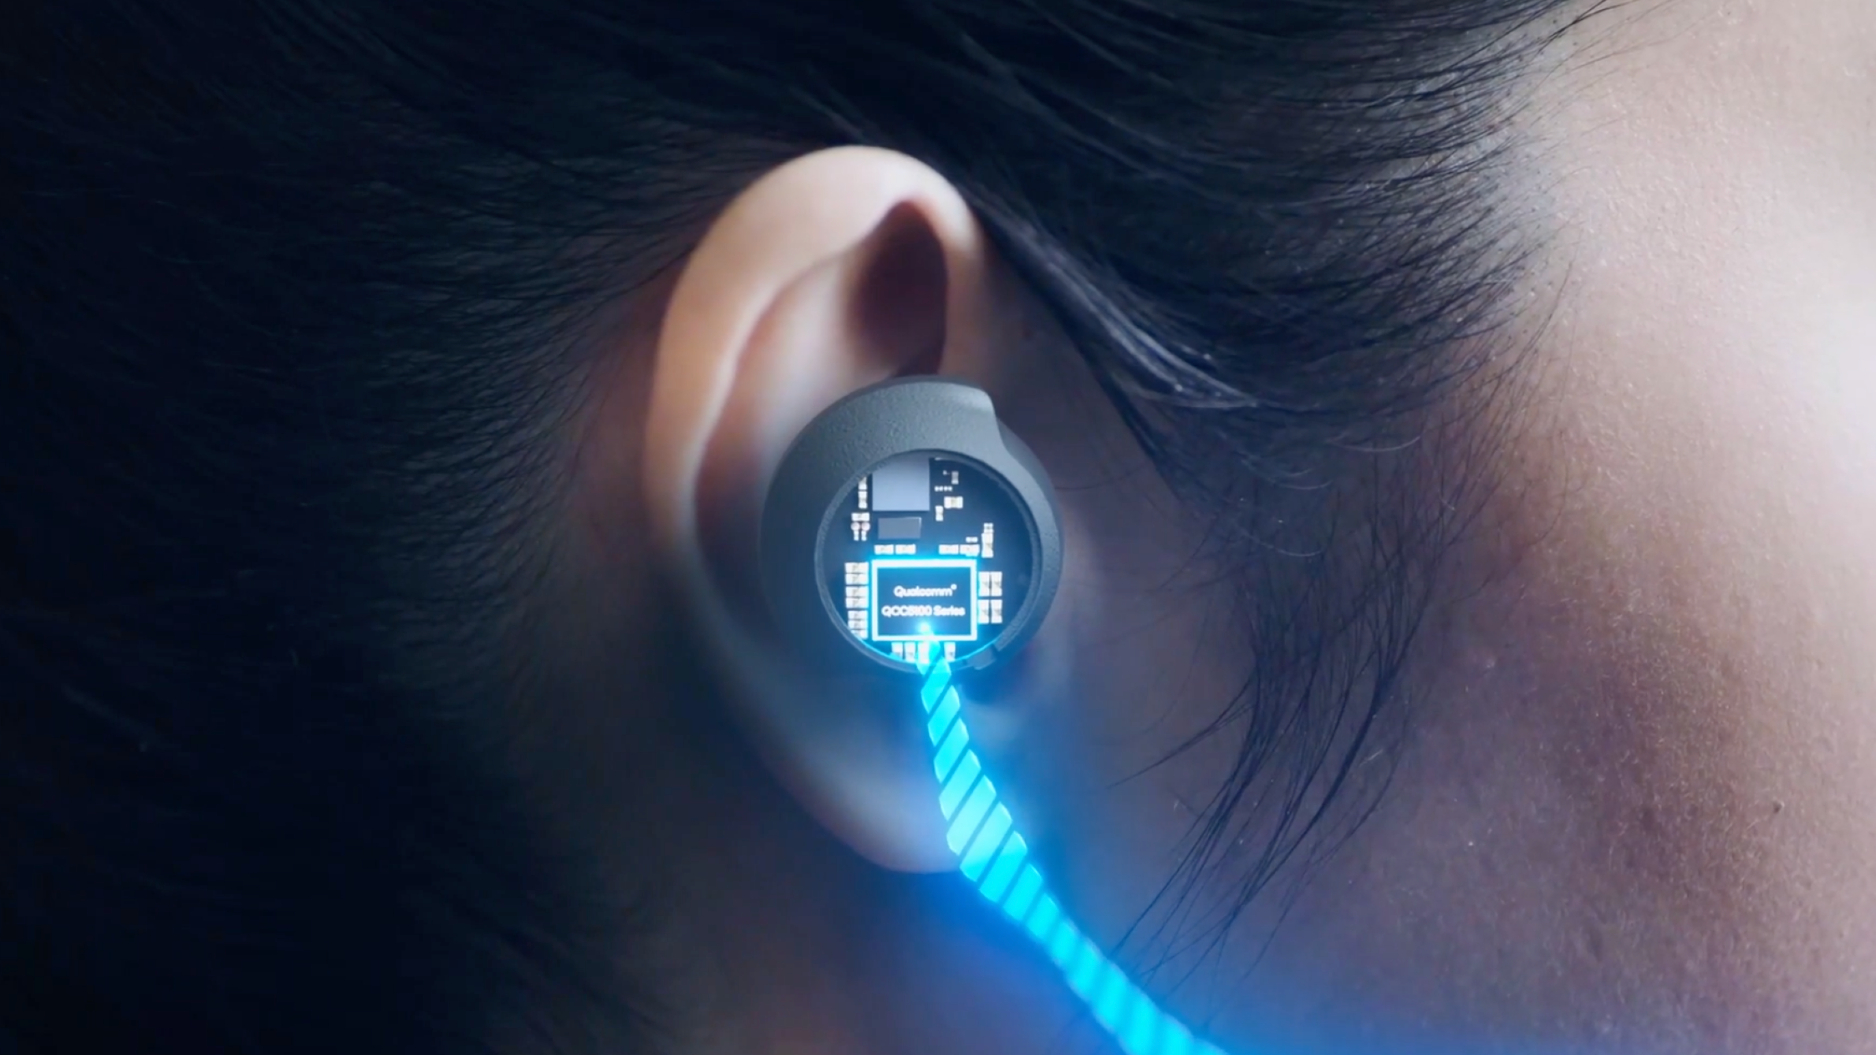 Qualcomm Snapdragon Sound embedded in an earbud, worn in a woman's ear